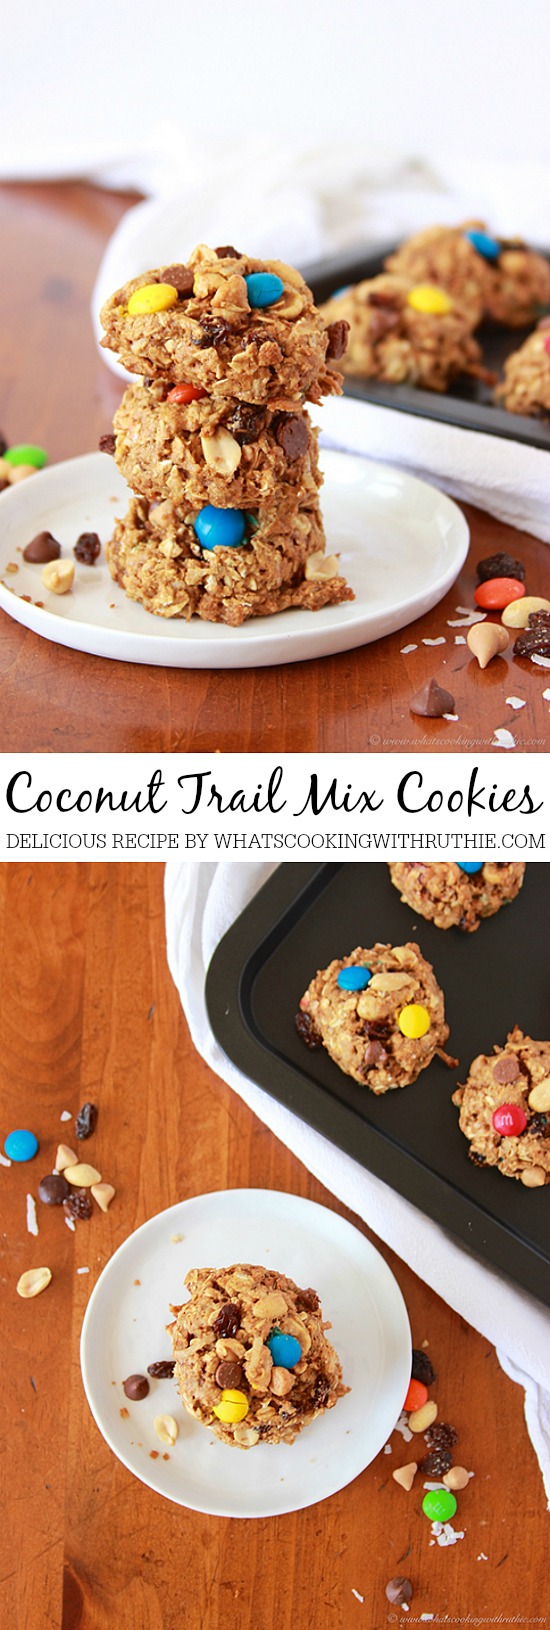 Coconut Trail Mix Cookies by www.cookingwithruthie.com are a healthy way to satisfy your sweet tooth! 